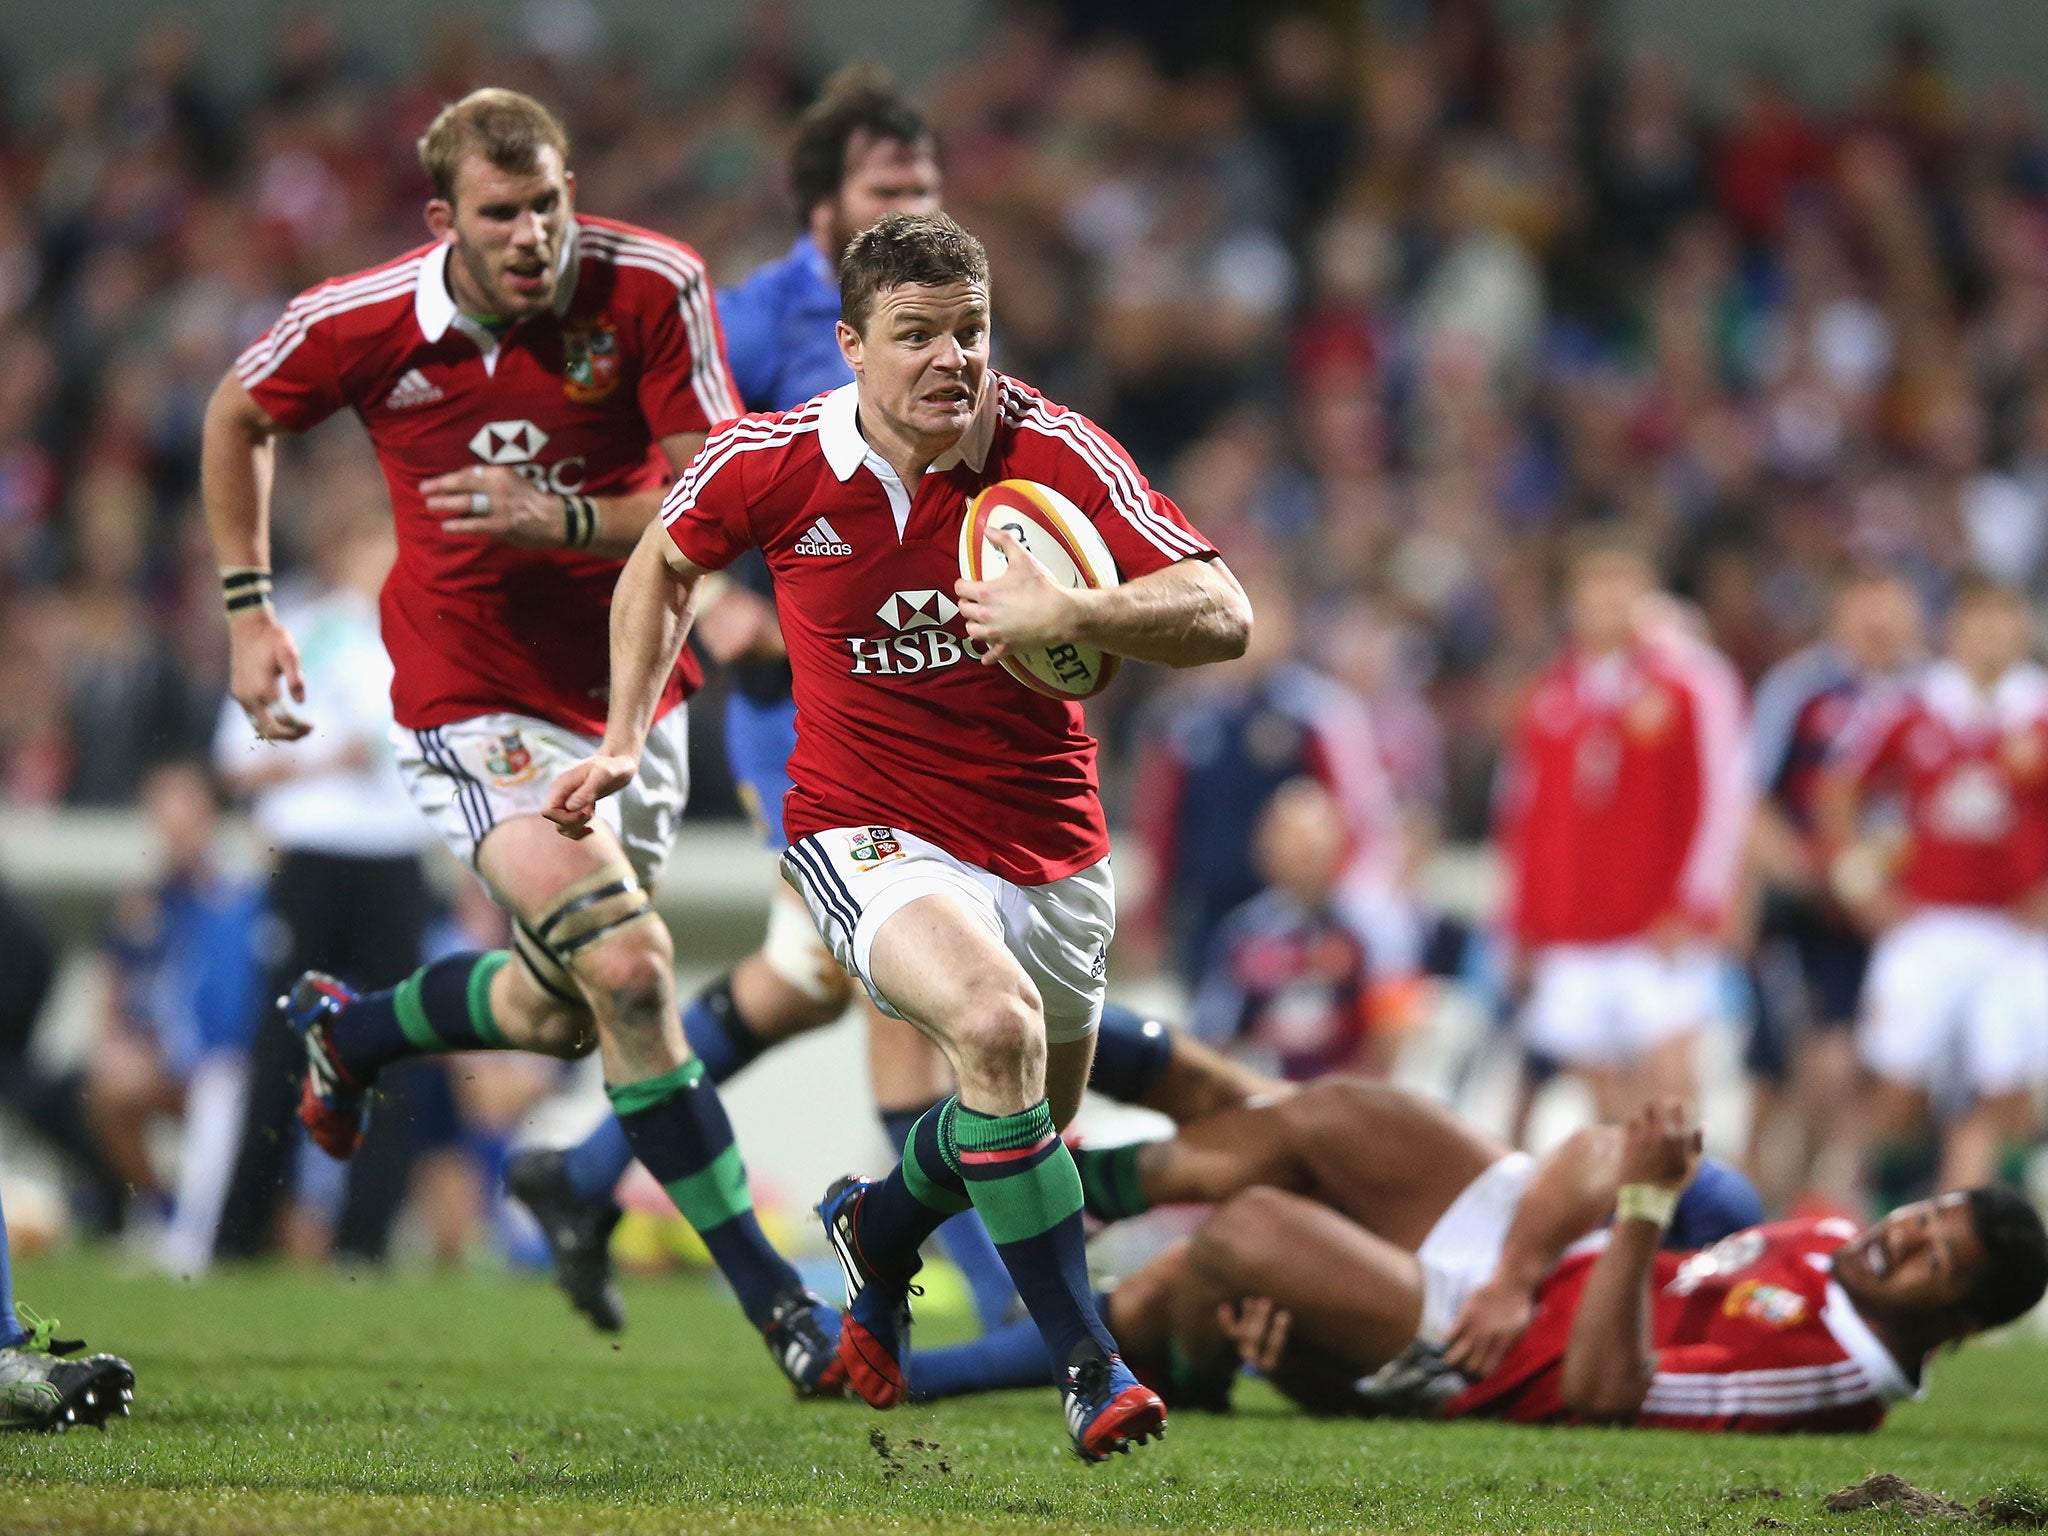 Brian O'Driscoll is one of those 13s who left a lasting impression on McGeechan